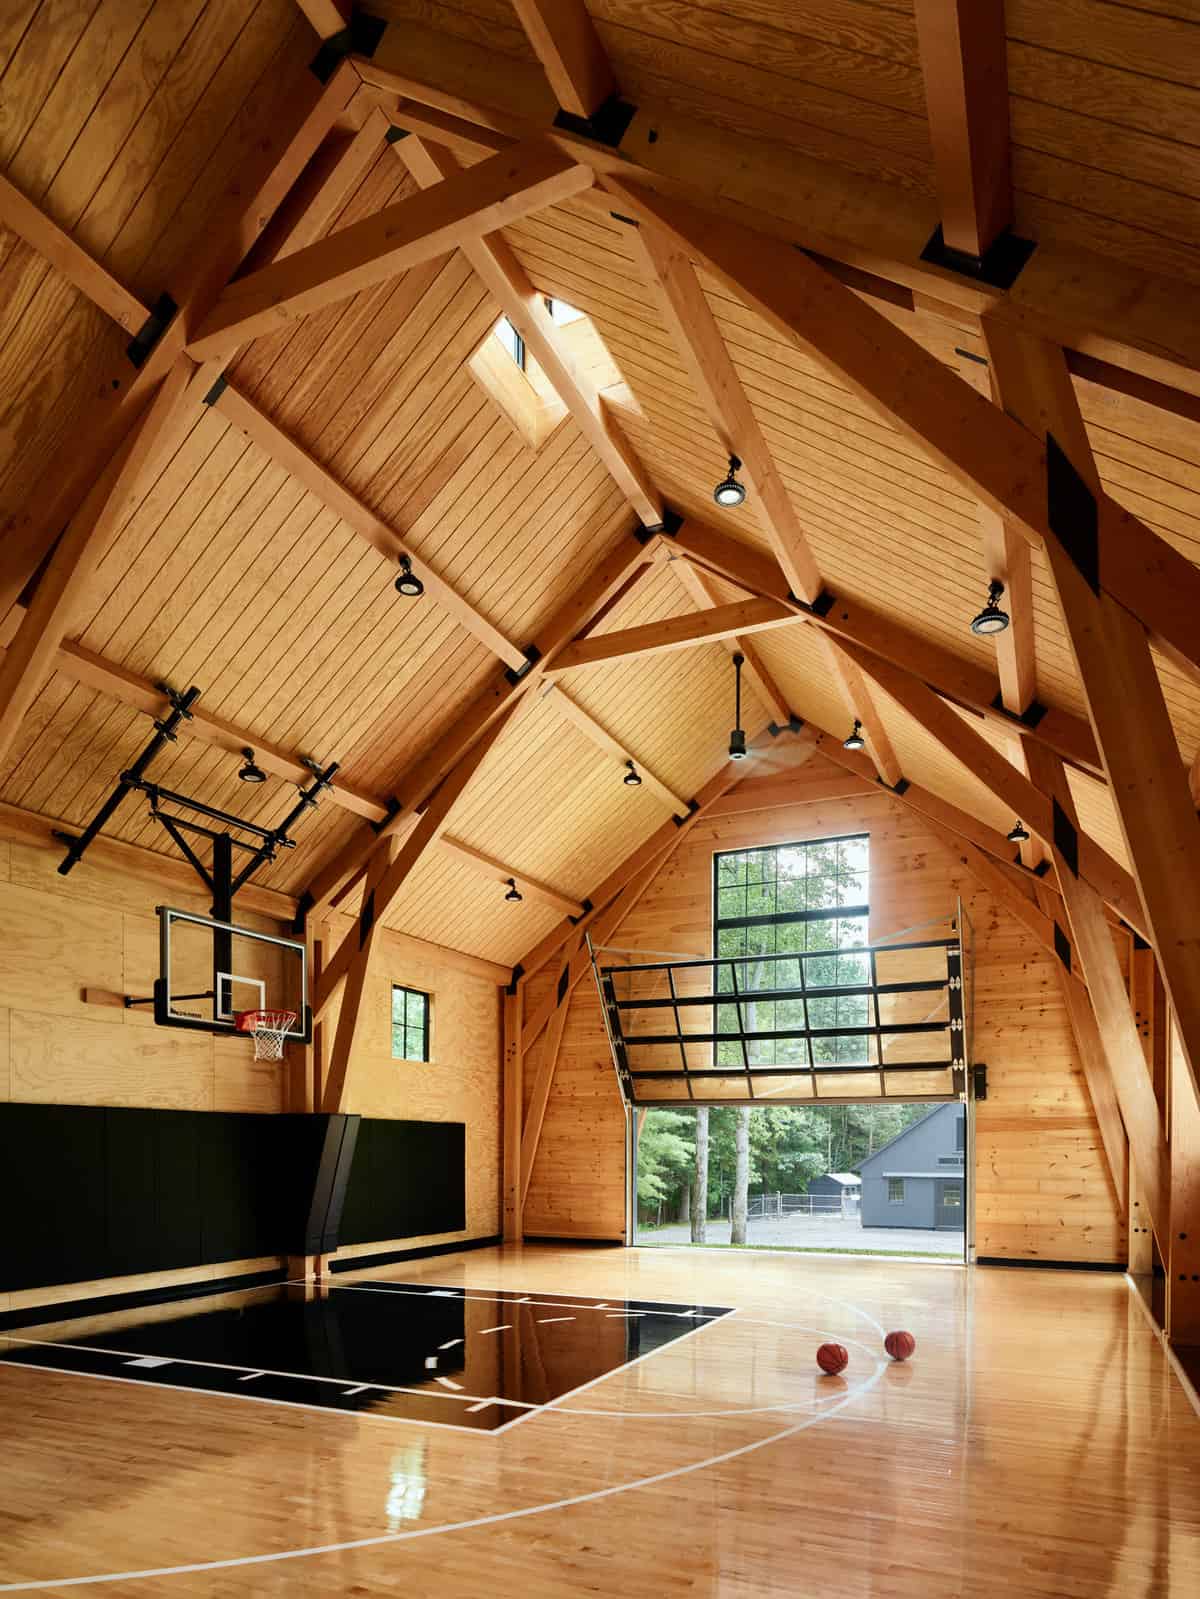 29-Fieldhouse-Barn-Interior 2.A structural Douglas Fir timber frame supports a volume of space large enough to shoot a basketball from any angle. It uses smaller dimensioned timber sizes in a carefully thought-out design that makes efficient use of the timber to structurally support such a large space.